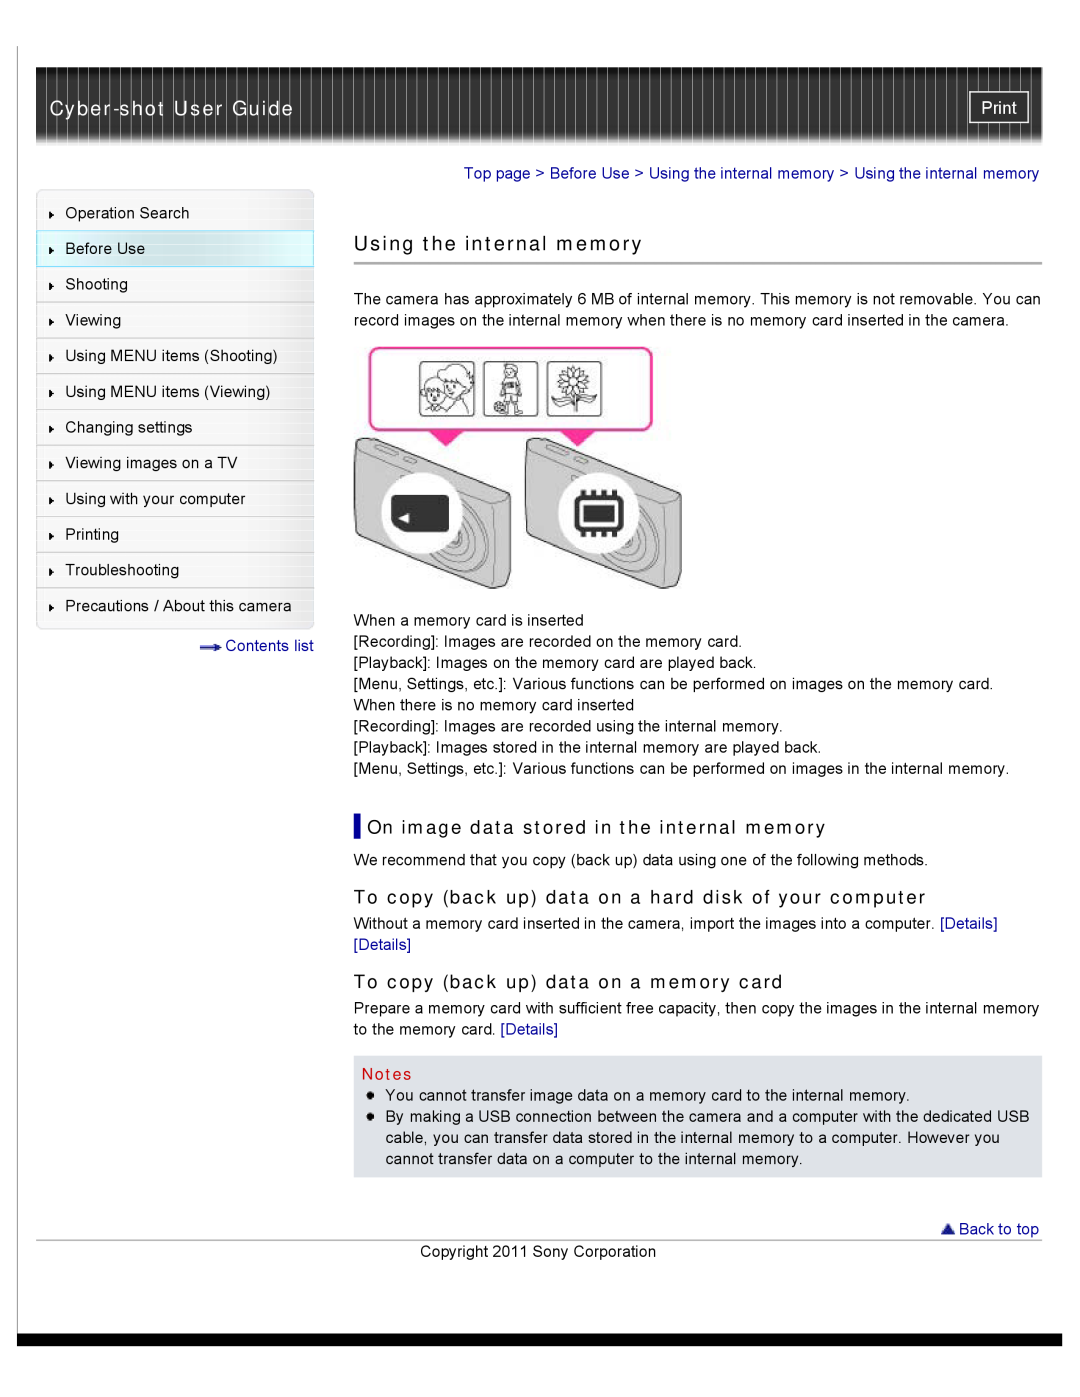 Sony DSC-W510 manual Using the internal memory, On image data stored in the internal memory, Cyber-shot User Guide, Print 